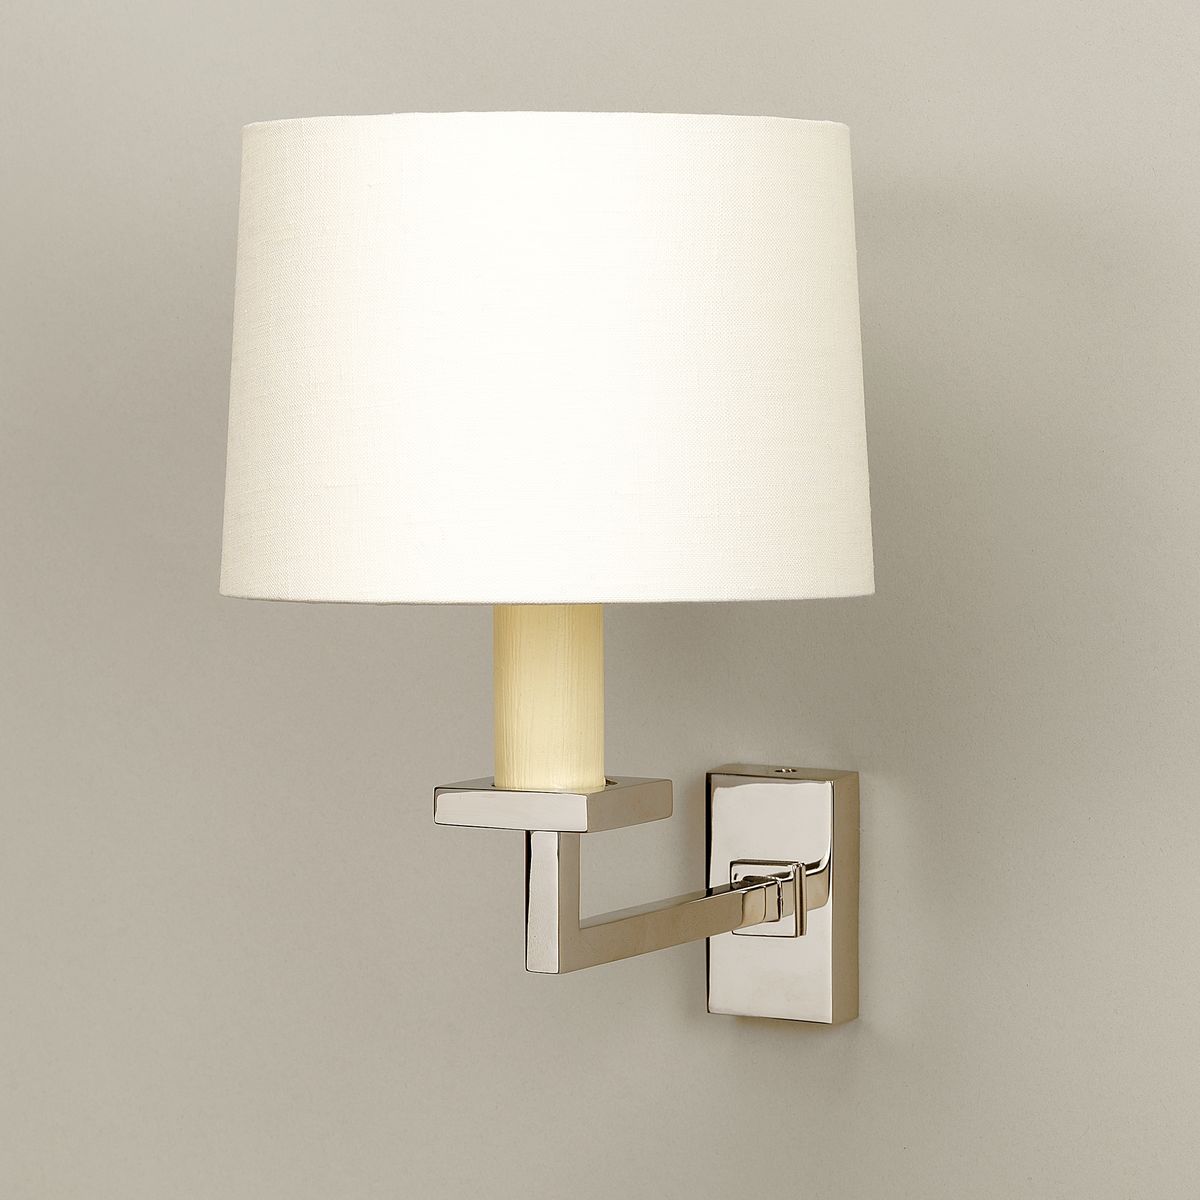 Fixed Library Wall Light/ Vaughan